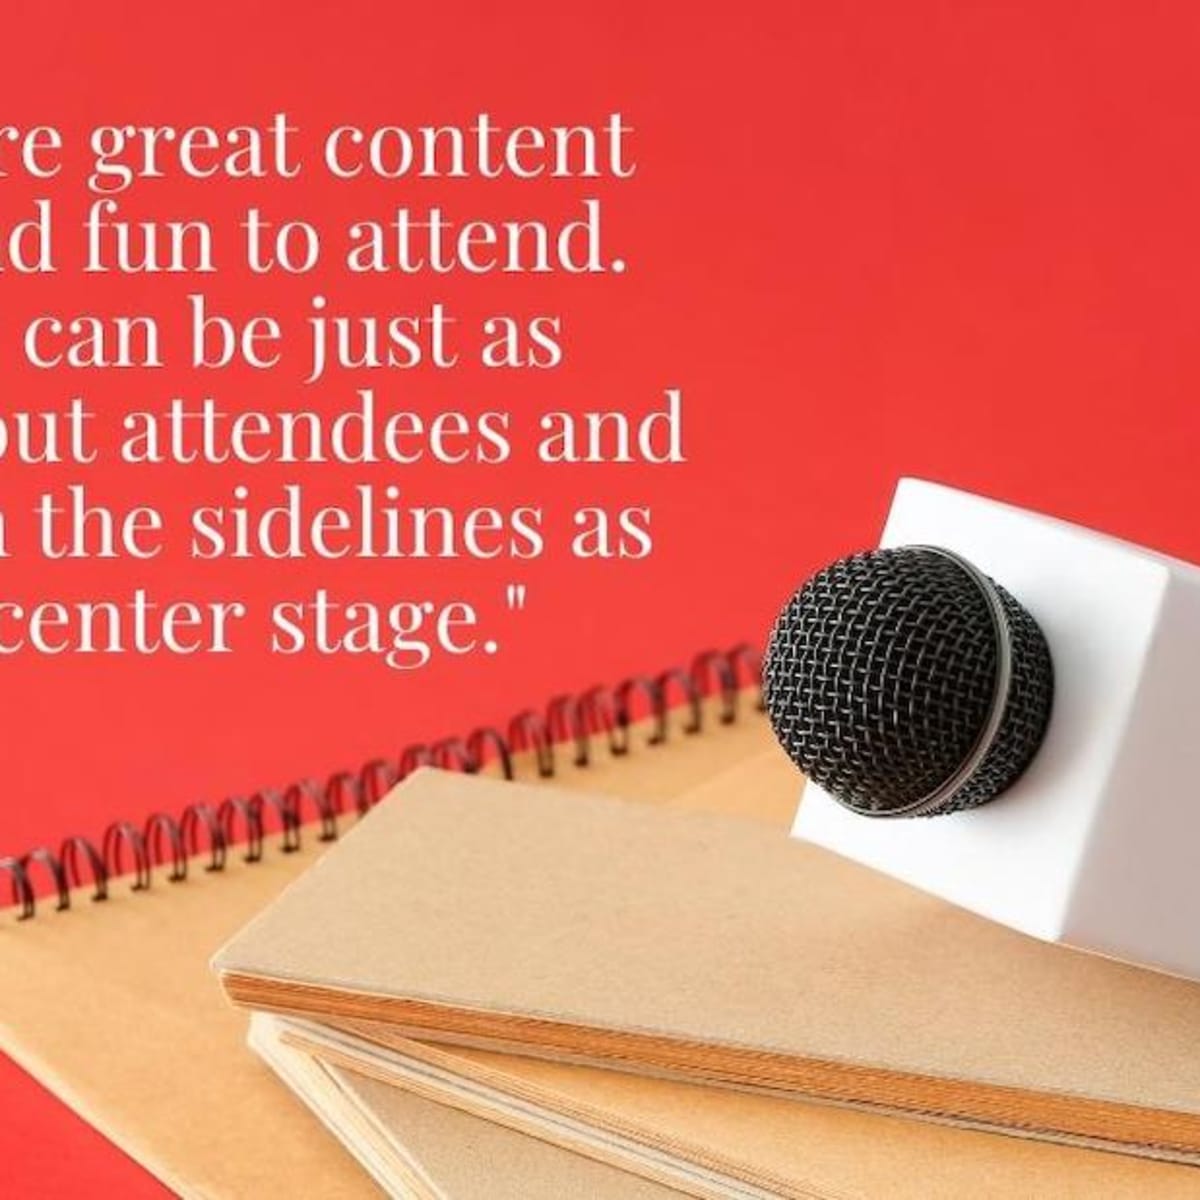 10 Tips on Covering Events as a Freelance Journalist - Writer's Digest